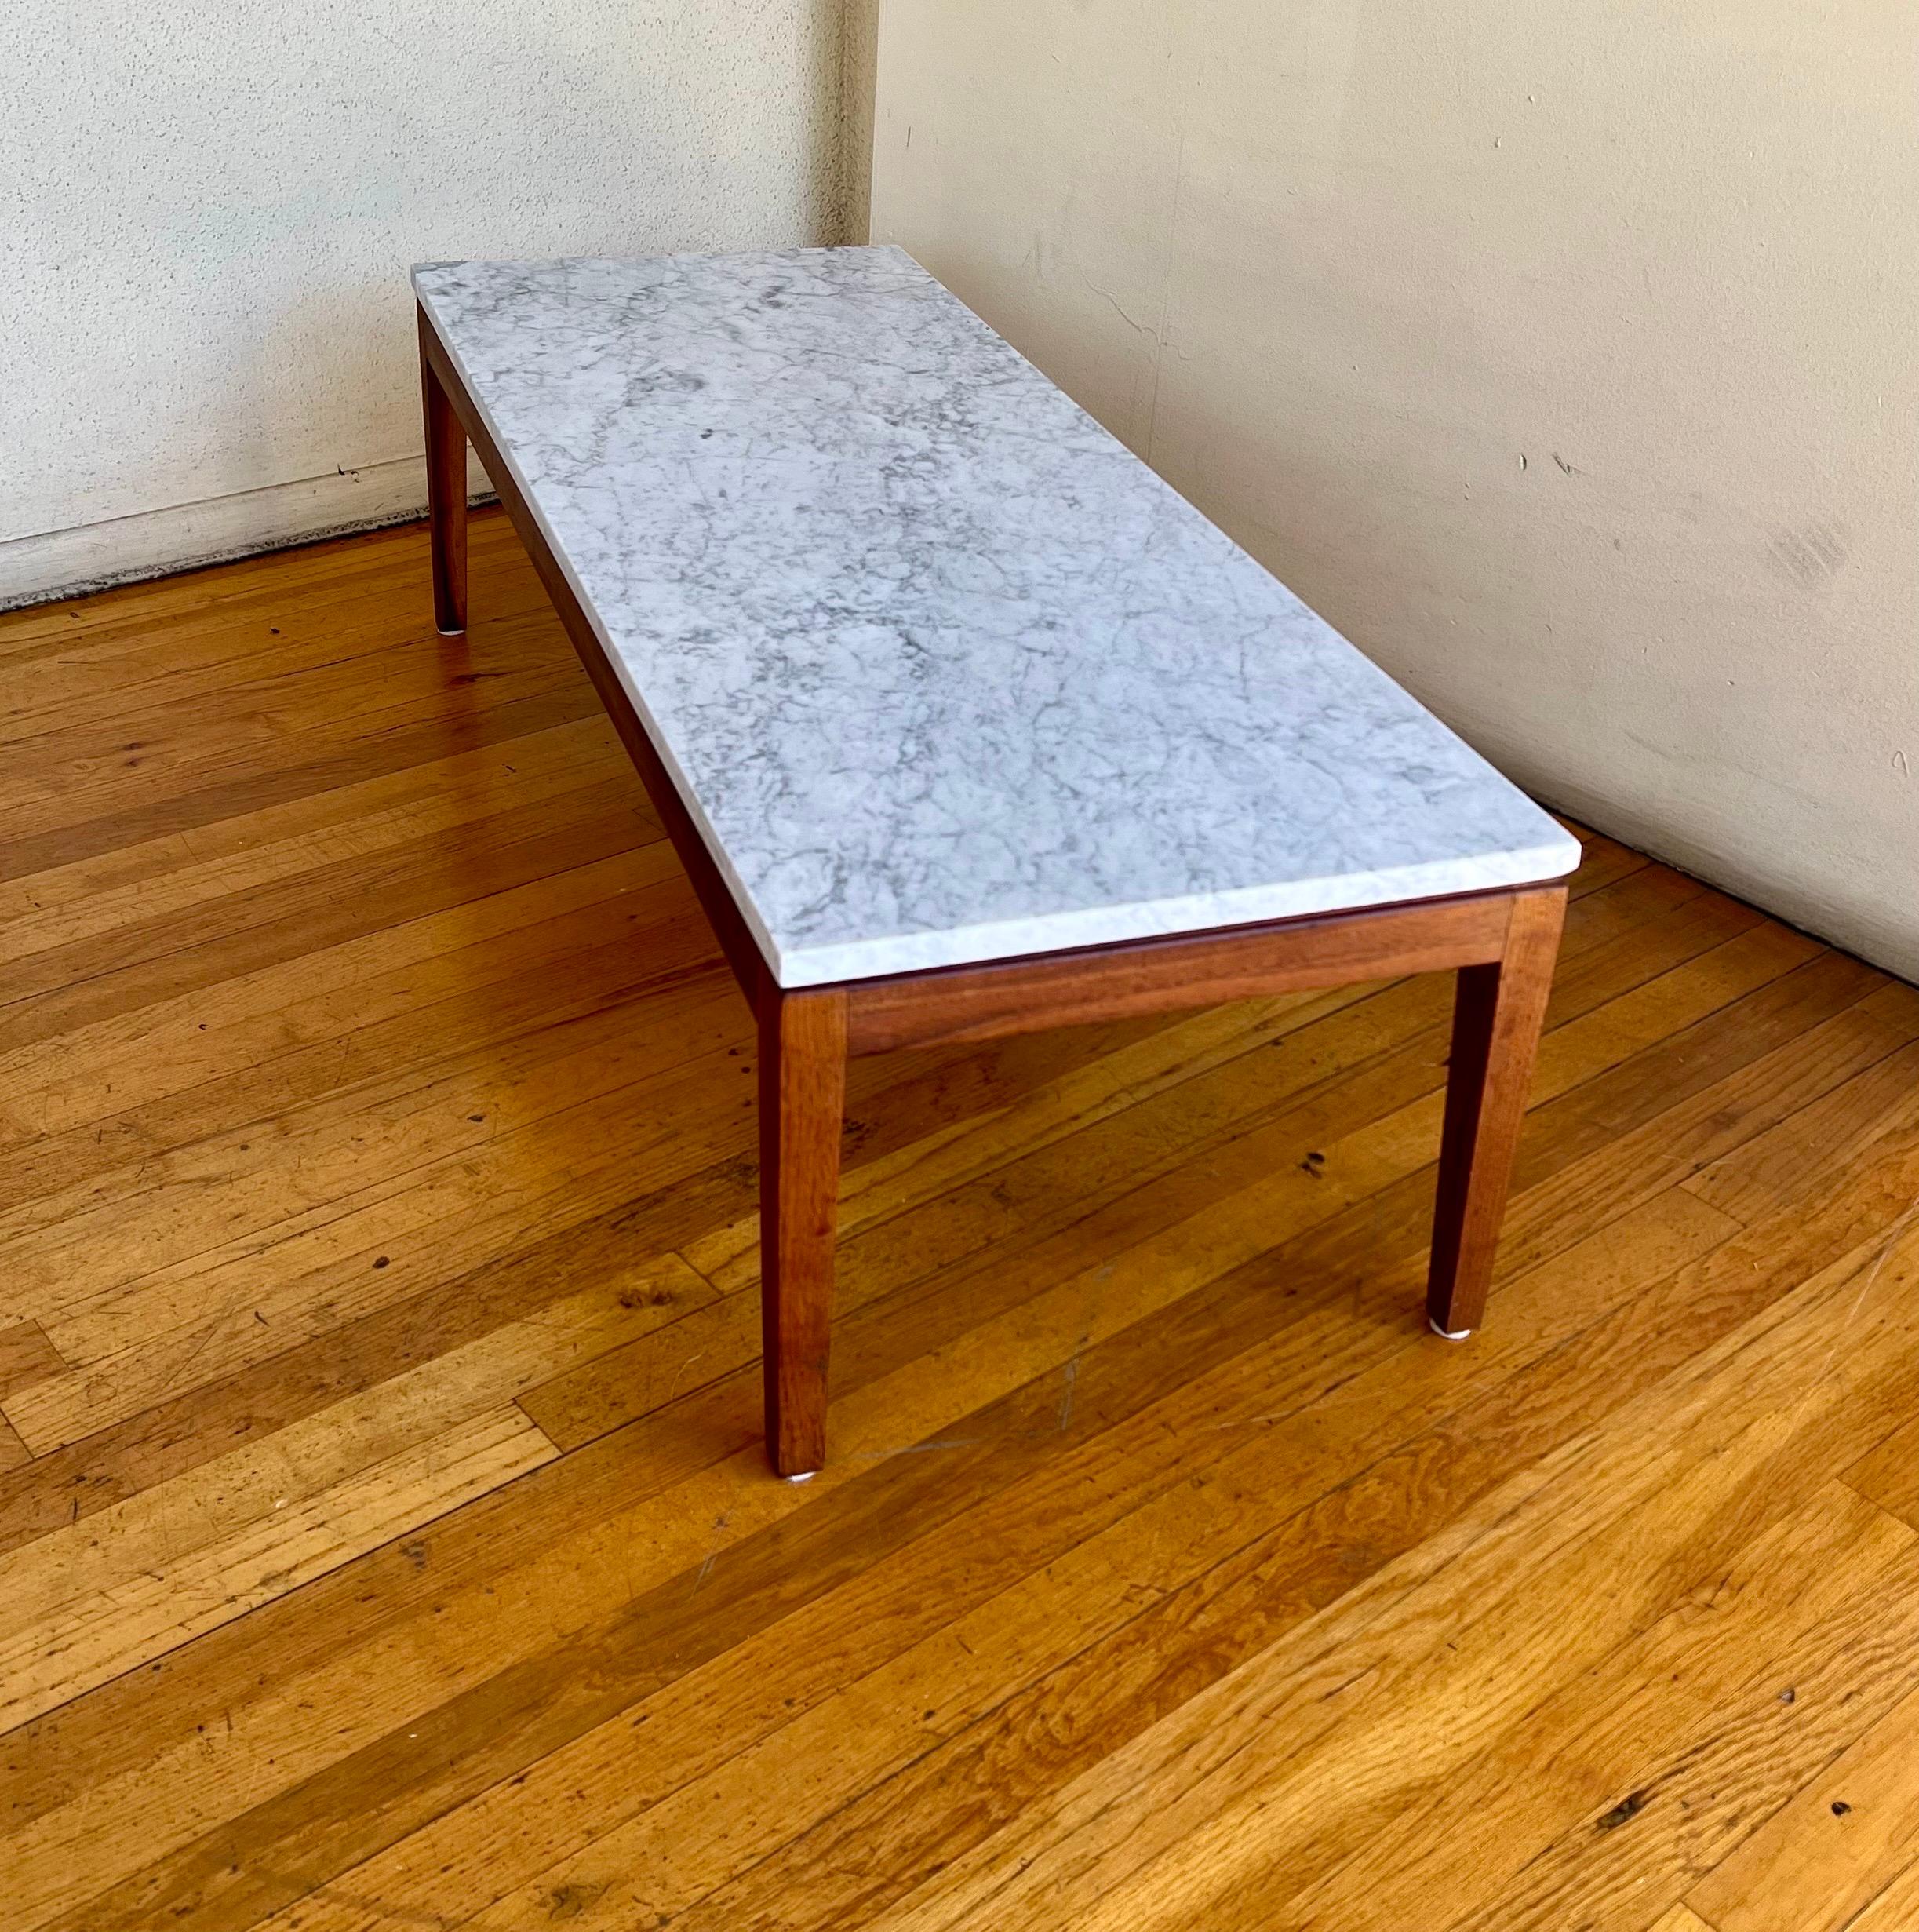 Simple elegant solid and sturdy freshly refinished base, in walnut with freshly polished Italian marble in great condition, on this American classic coffee table.